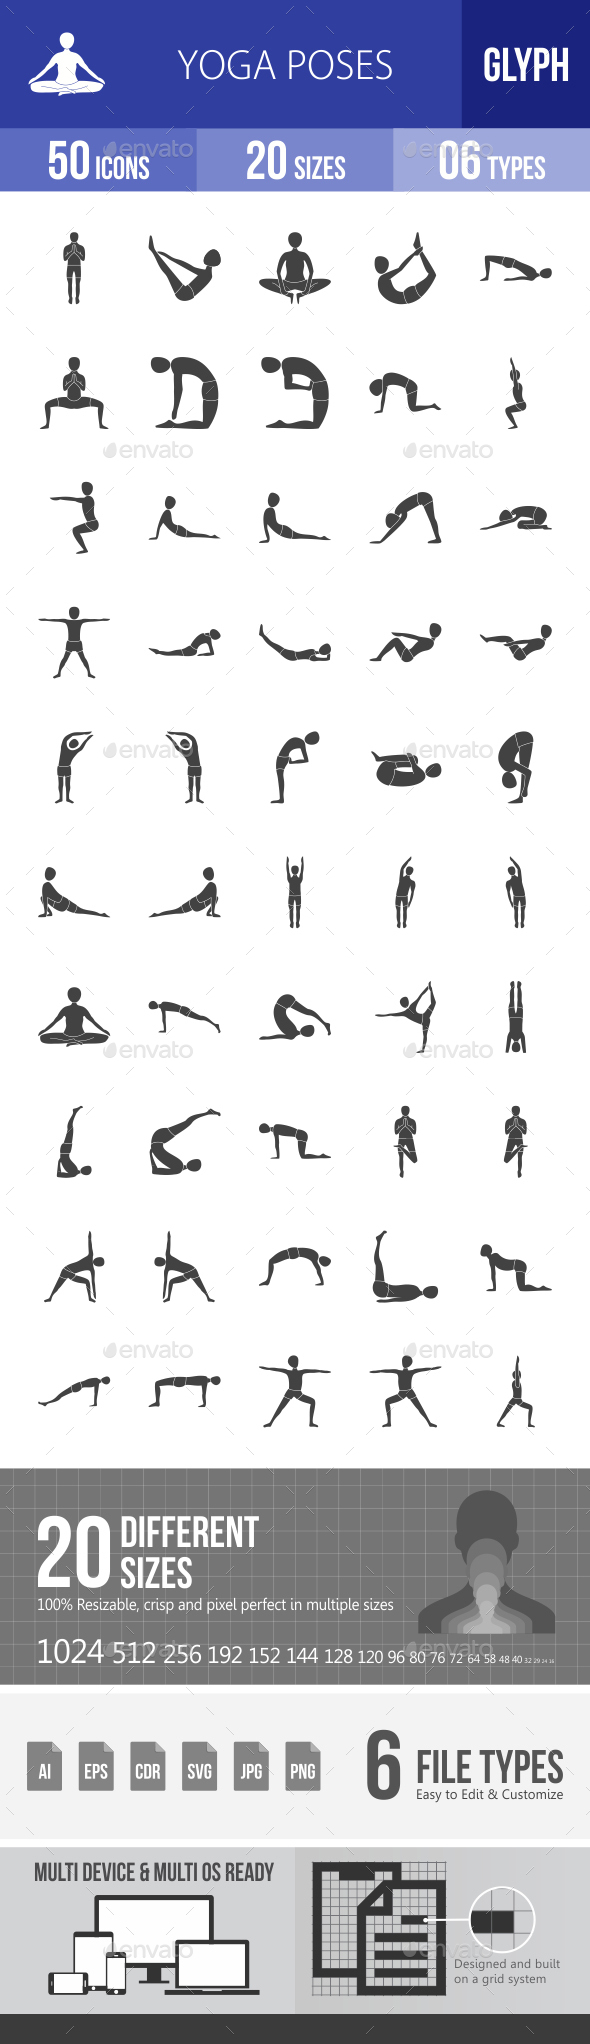 Yoga for Women at Every Fitness Level